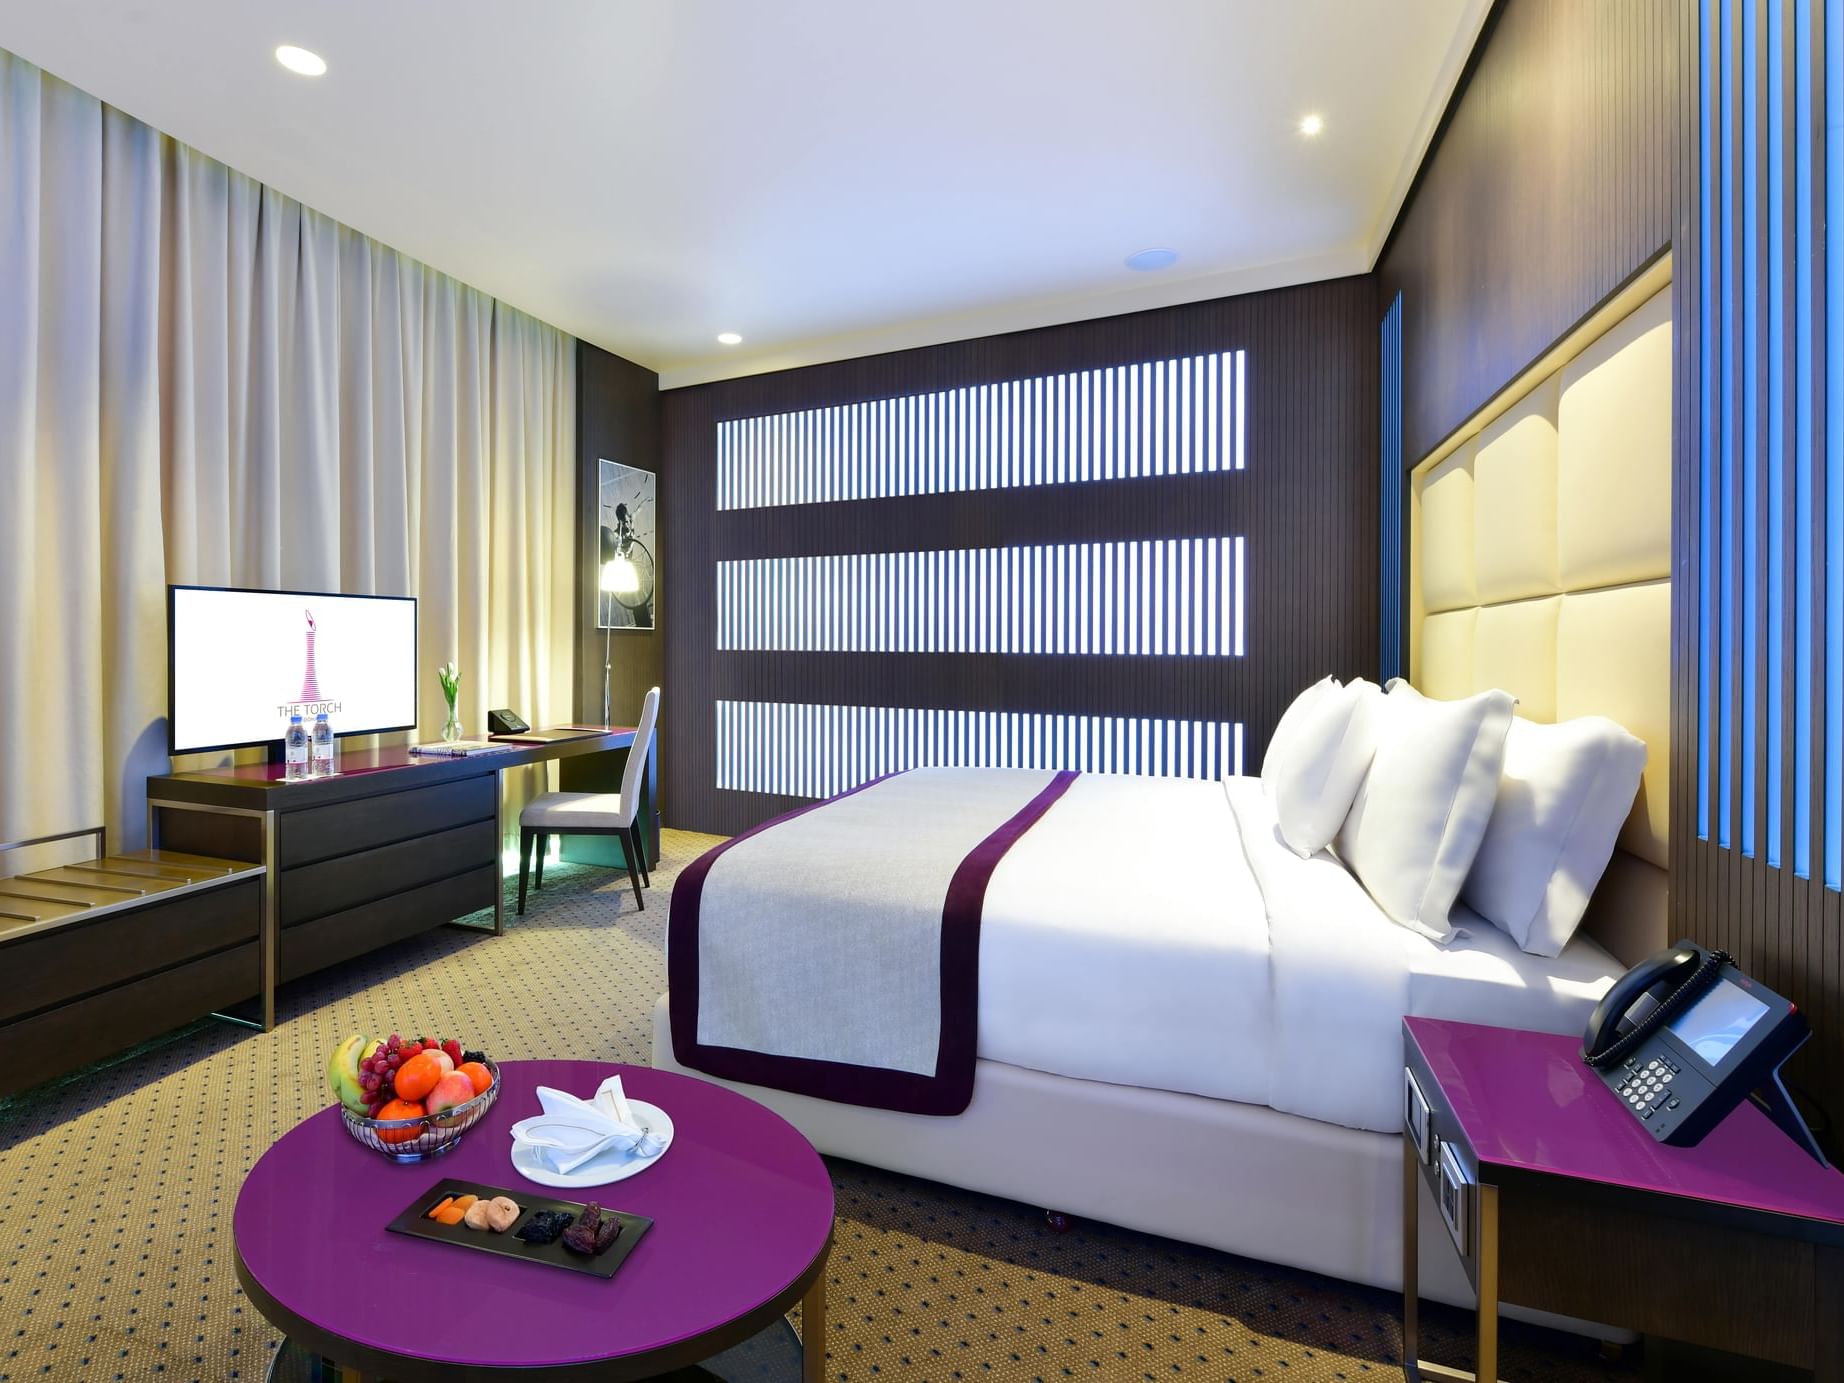 Deluxe Room at The Torch Doha